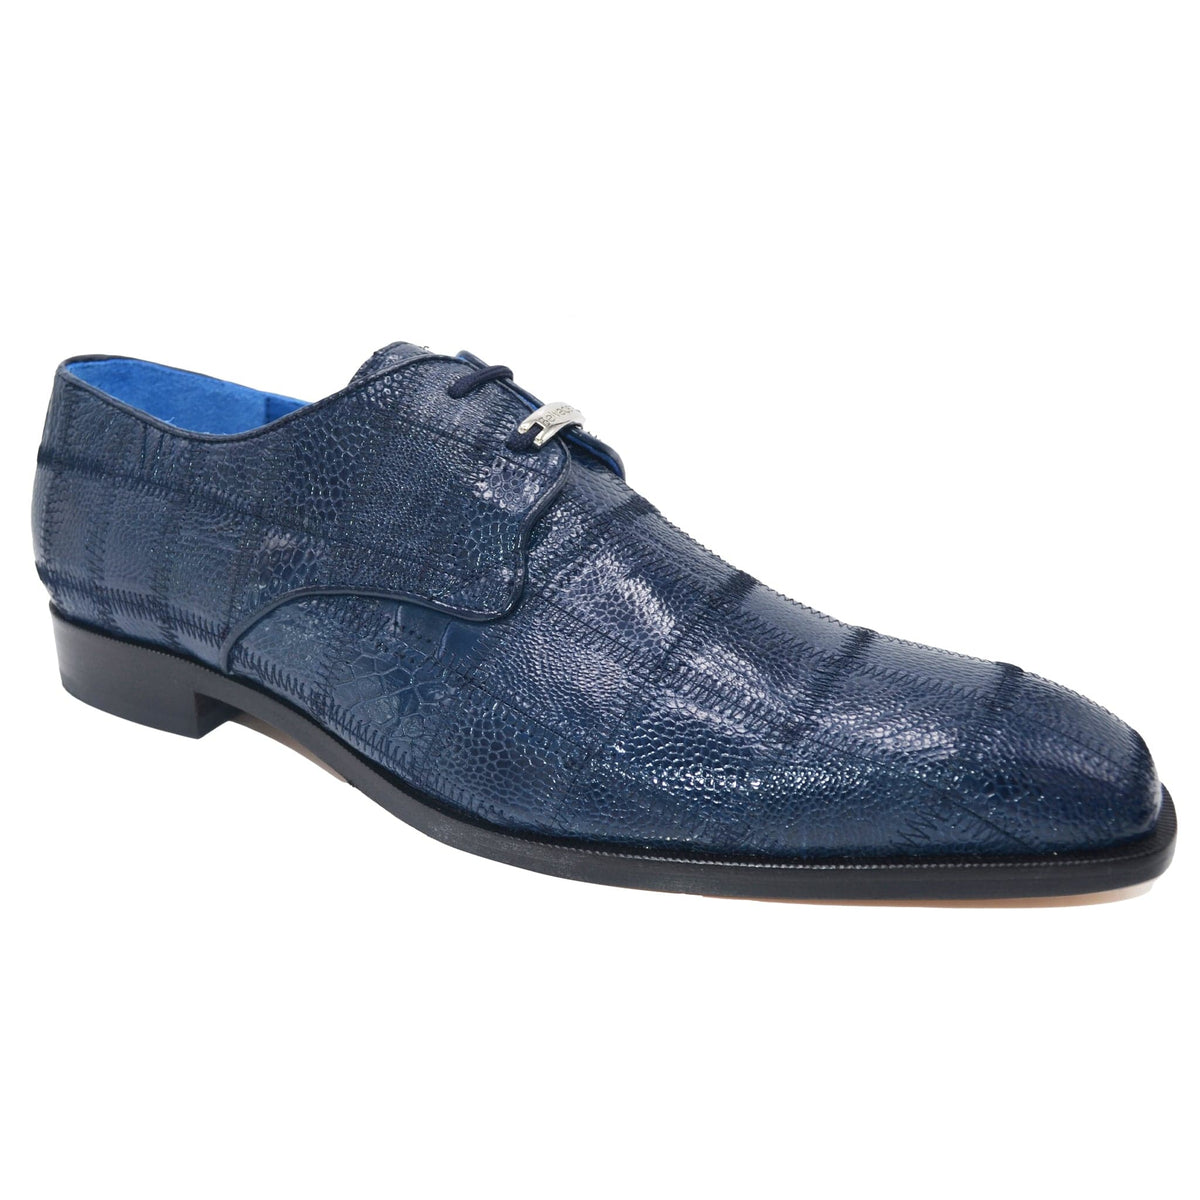 BELVEDERE F T NAVY / 8.5 SABATO LACE UP BY BELVEDERE/R16